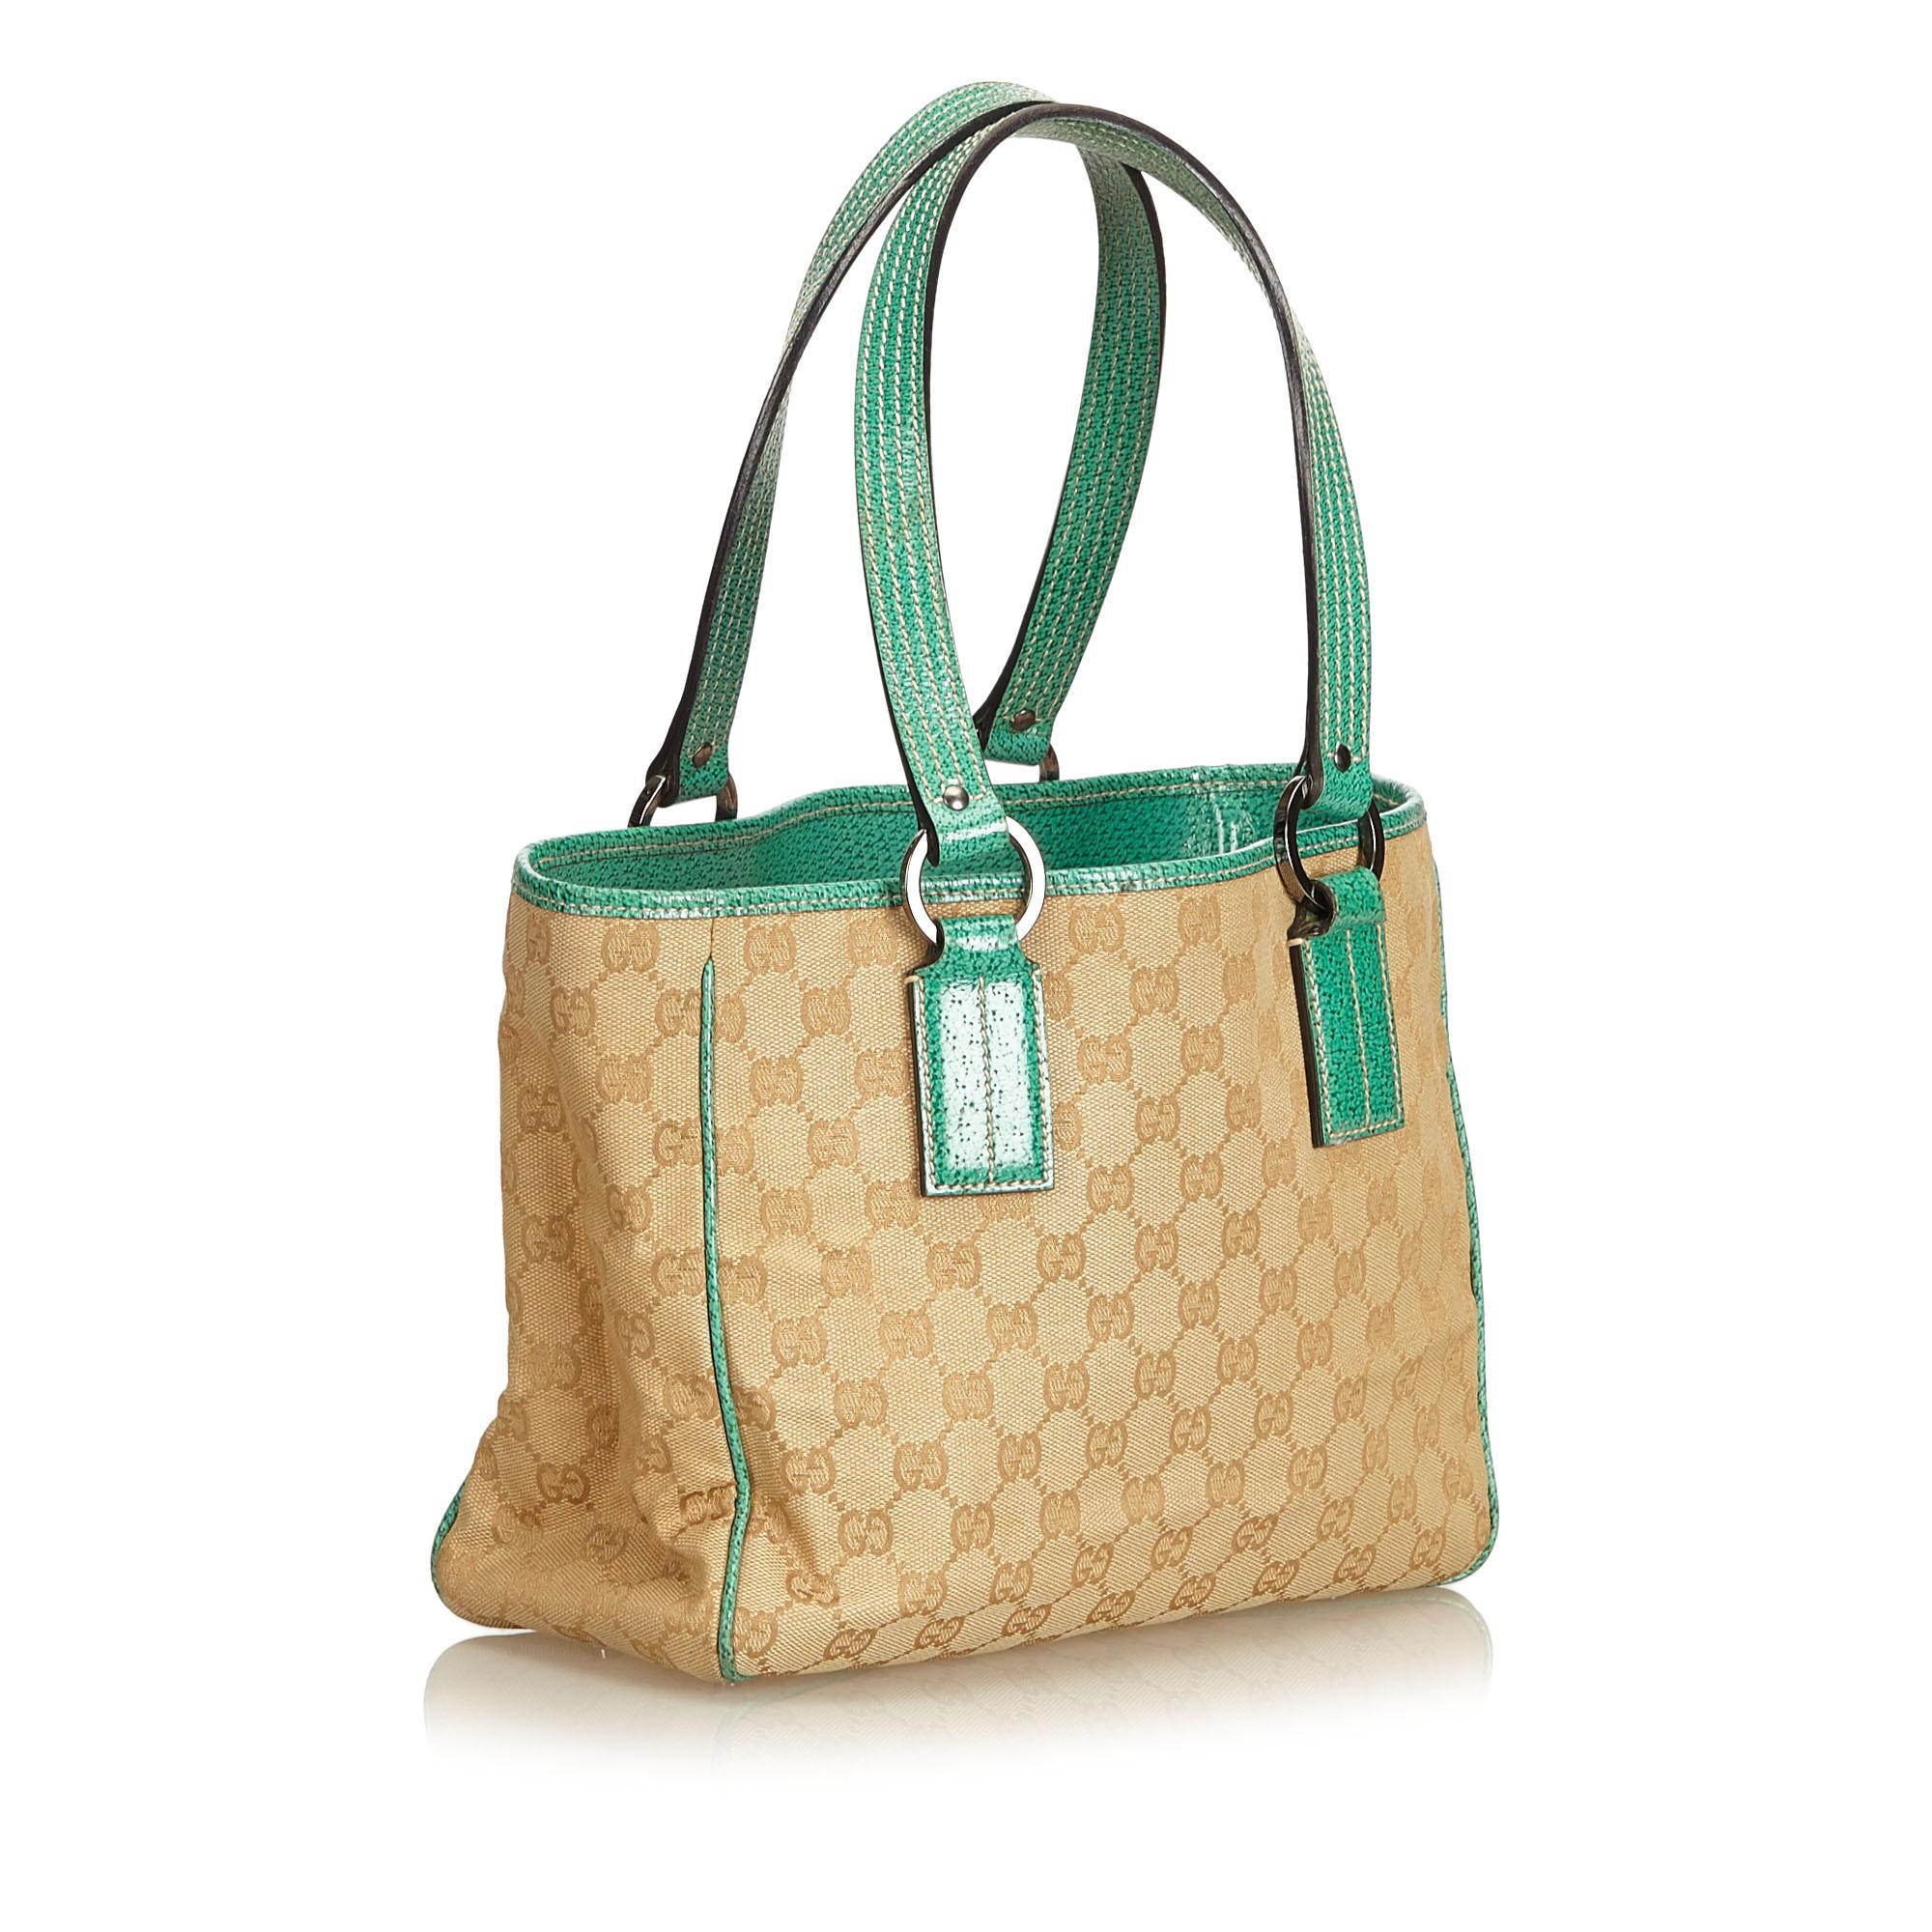 This tote bag features a jacquard body with leather trim, flat leather straps, open top, and interior zip pocket.

It carries a B+ condition rating.

Dimensions: 
Length 21.00 cm
Width 27.50 cm
Depth 10.50 cm
Drop 19.50

Inclusions: No longer comes